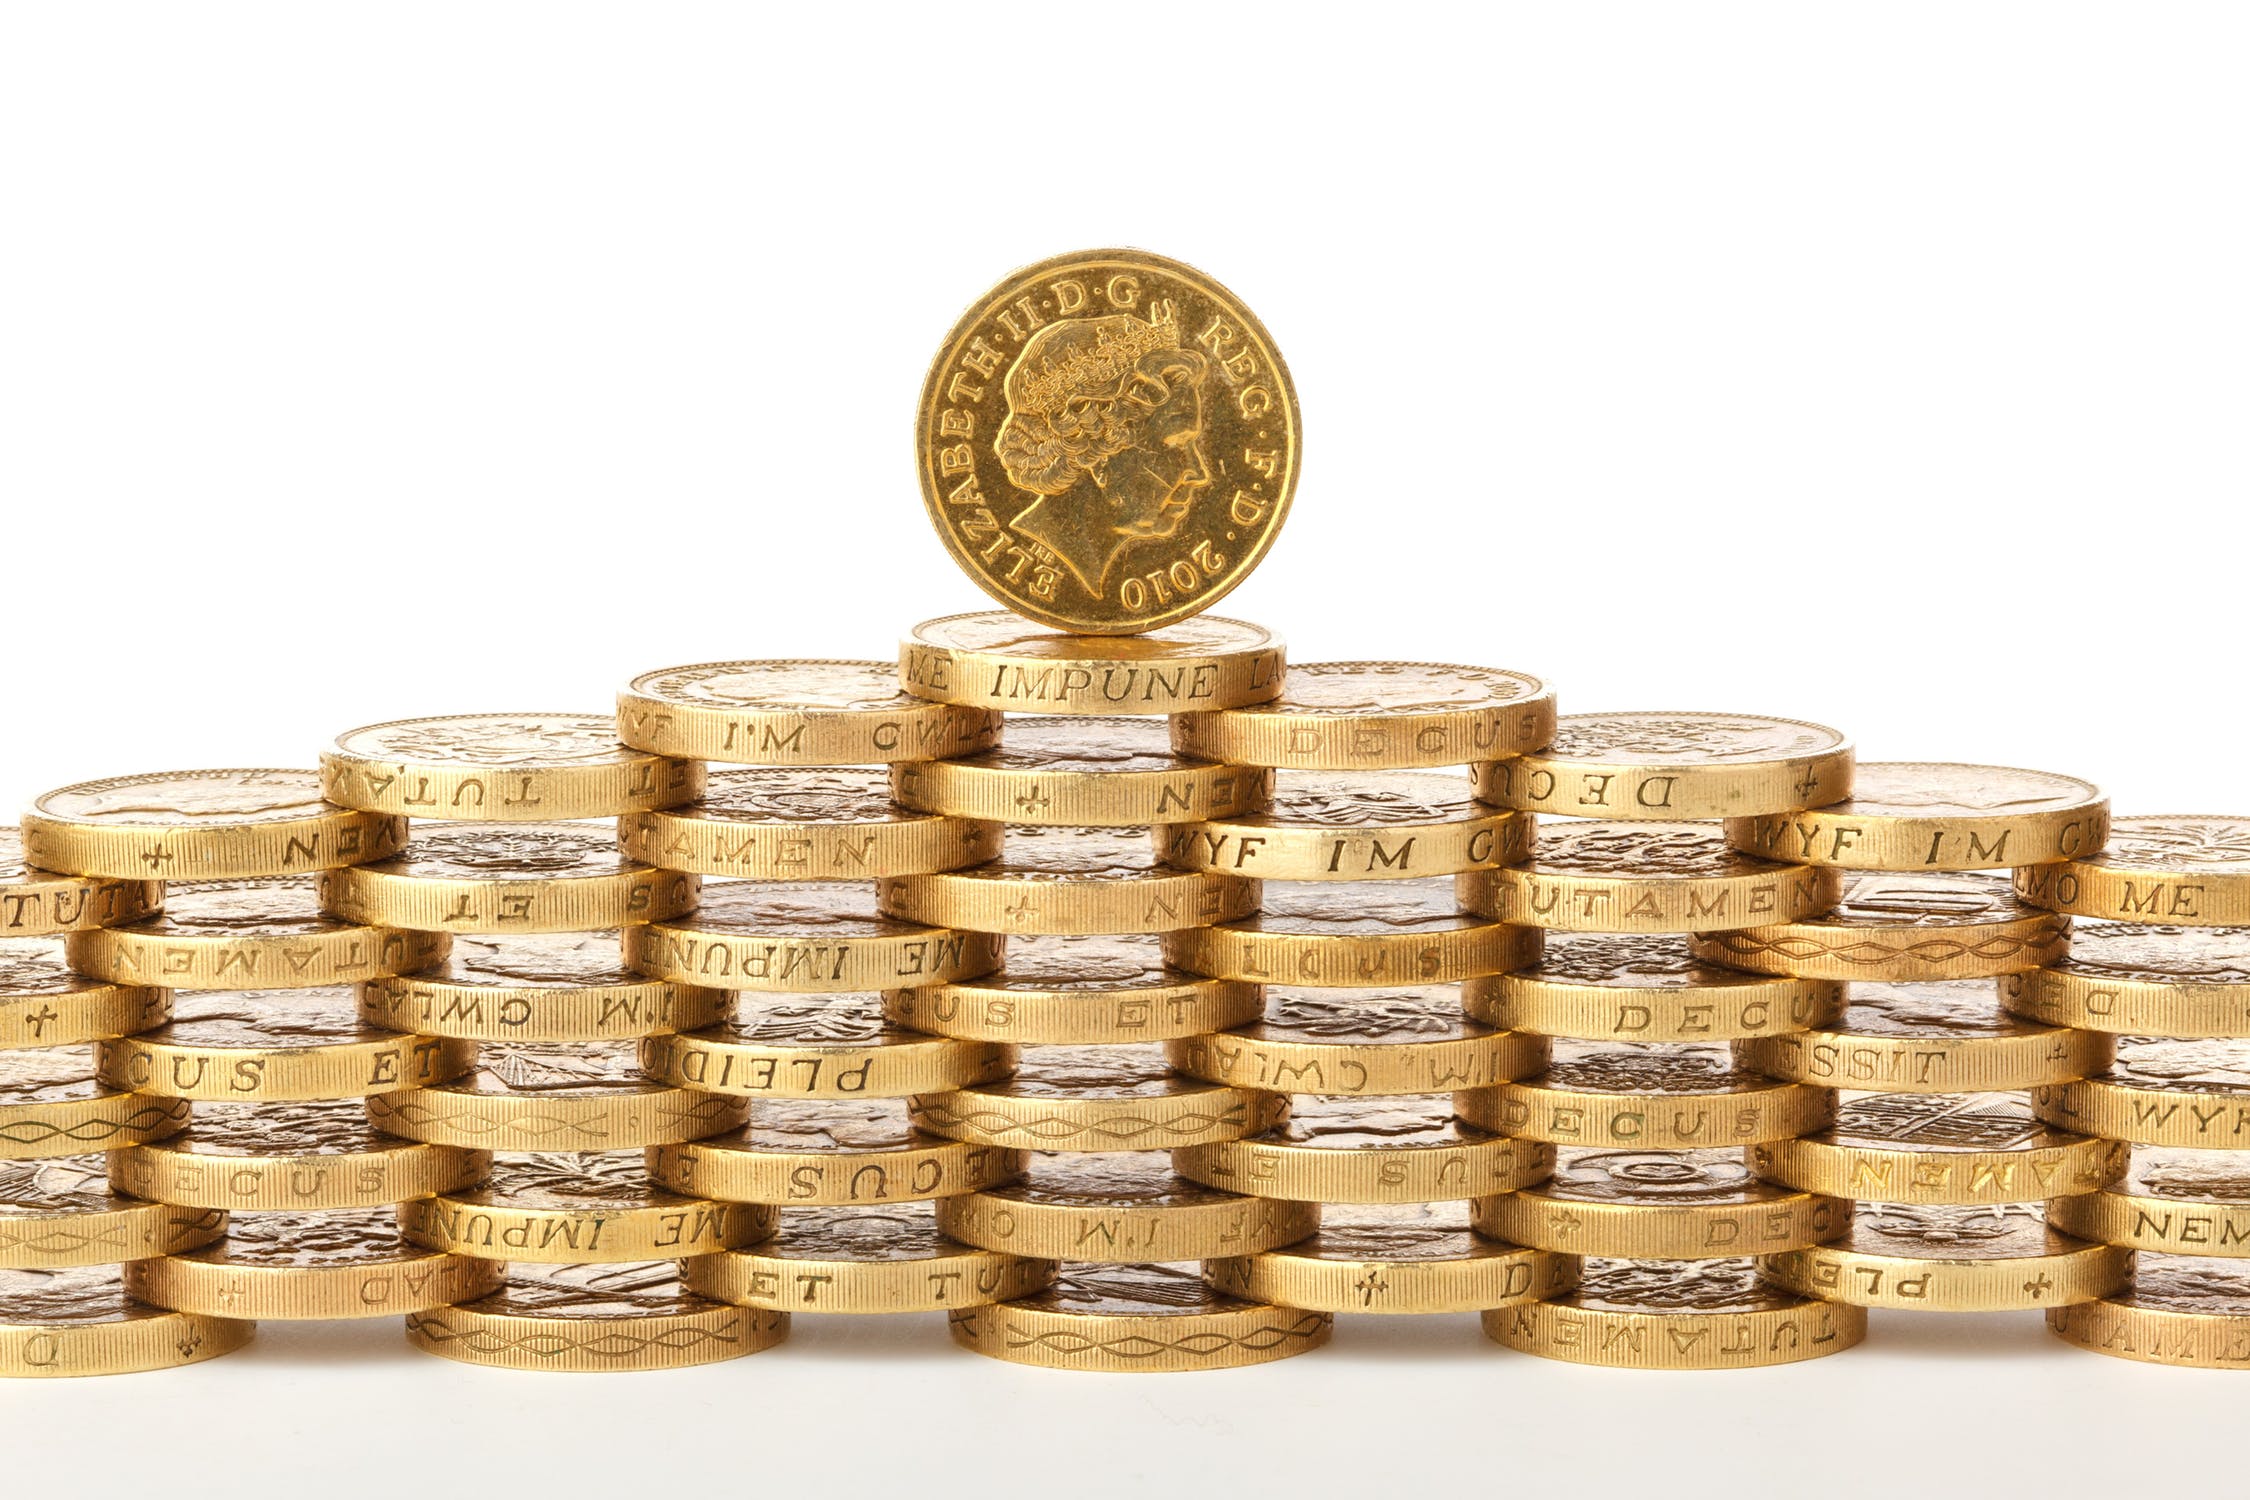 An image of pound coins all stacked together